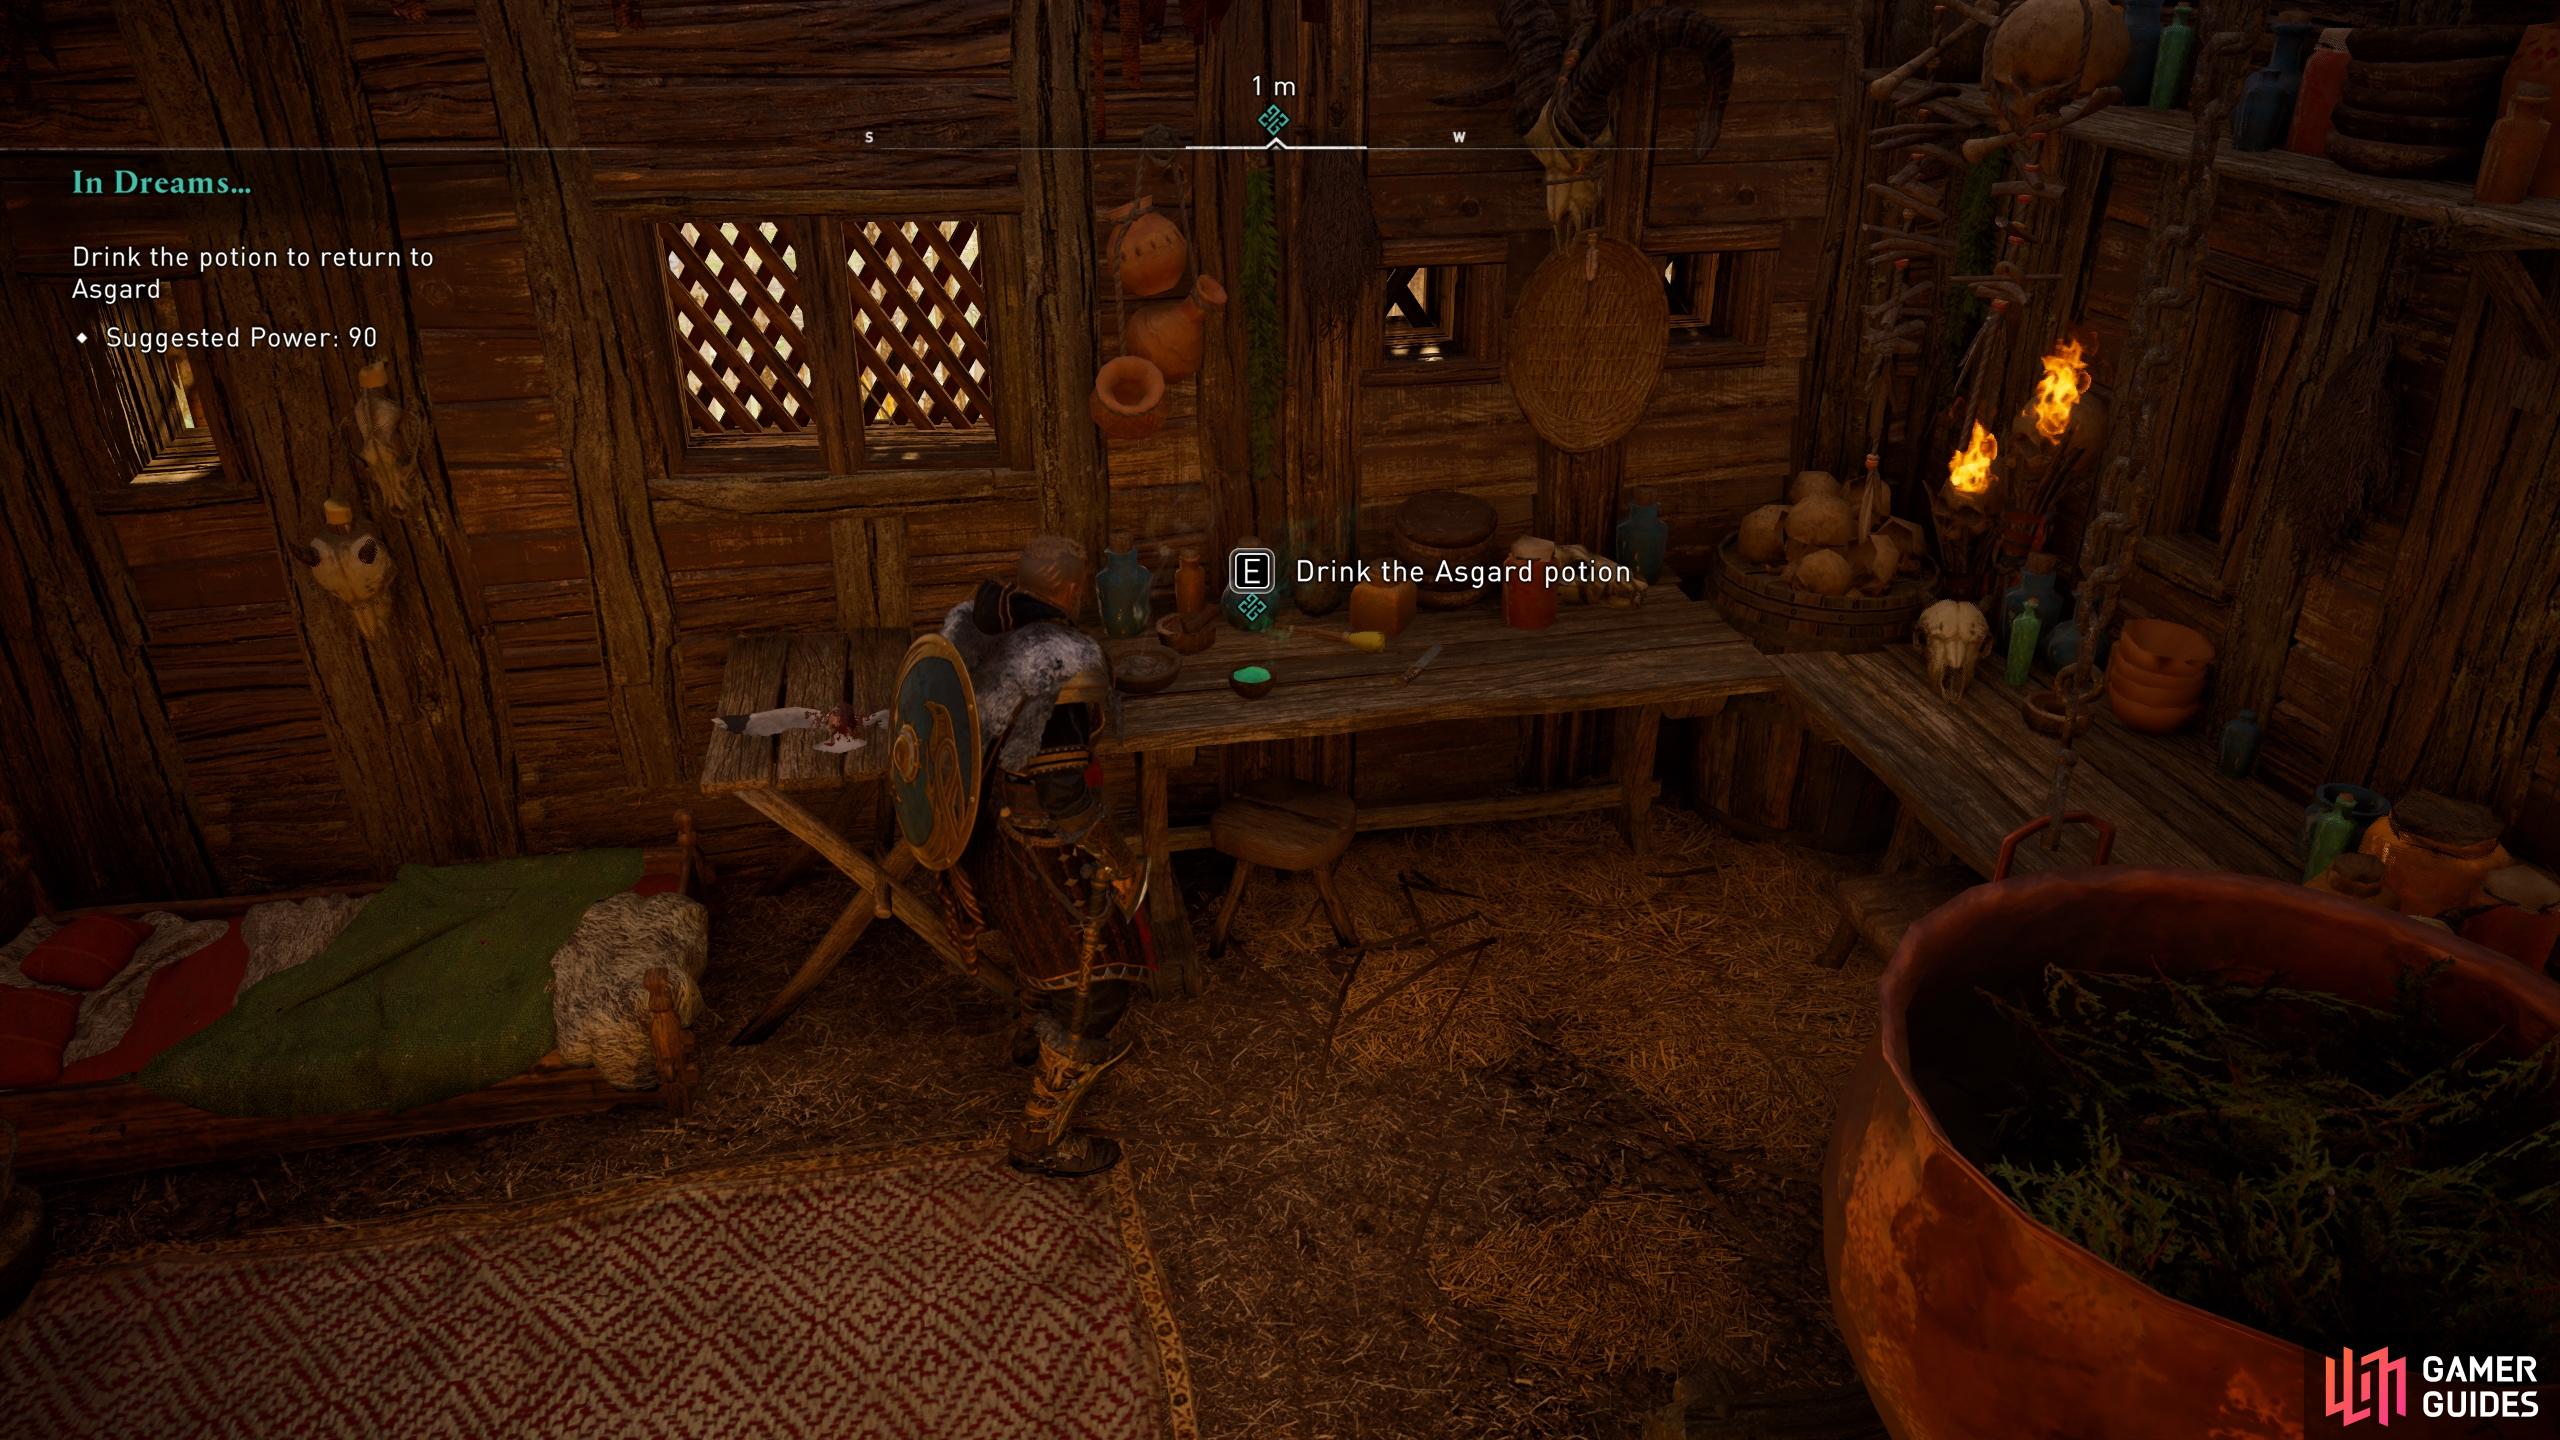 Drink the potion in Valka's hut to travel back to Asgard.